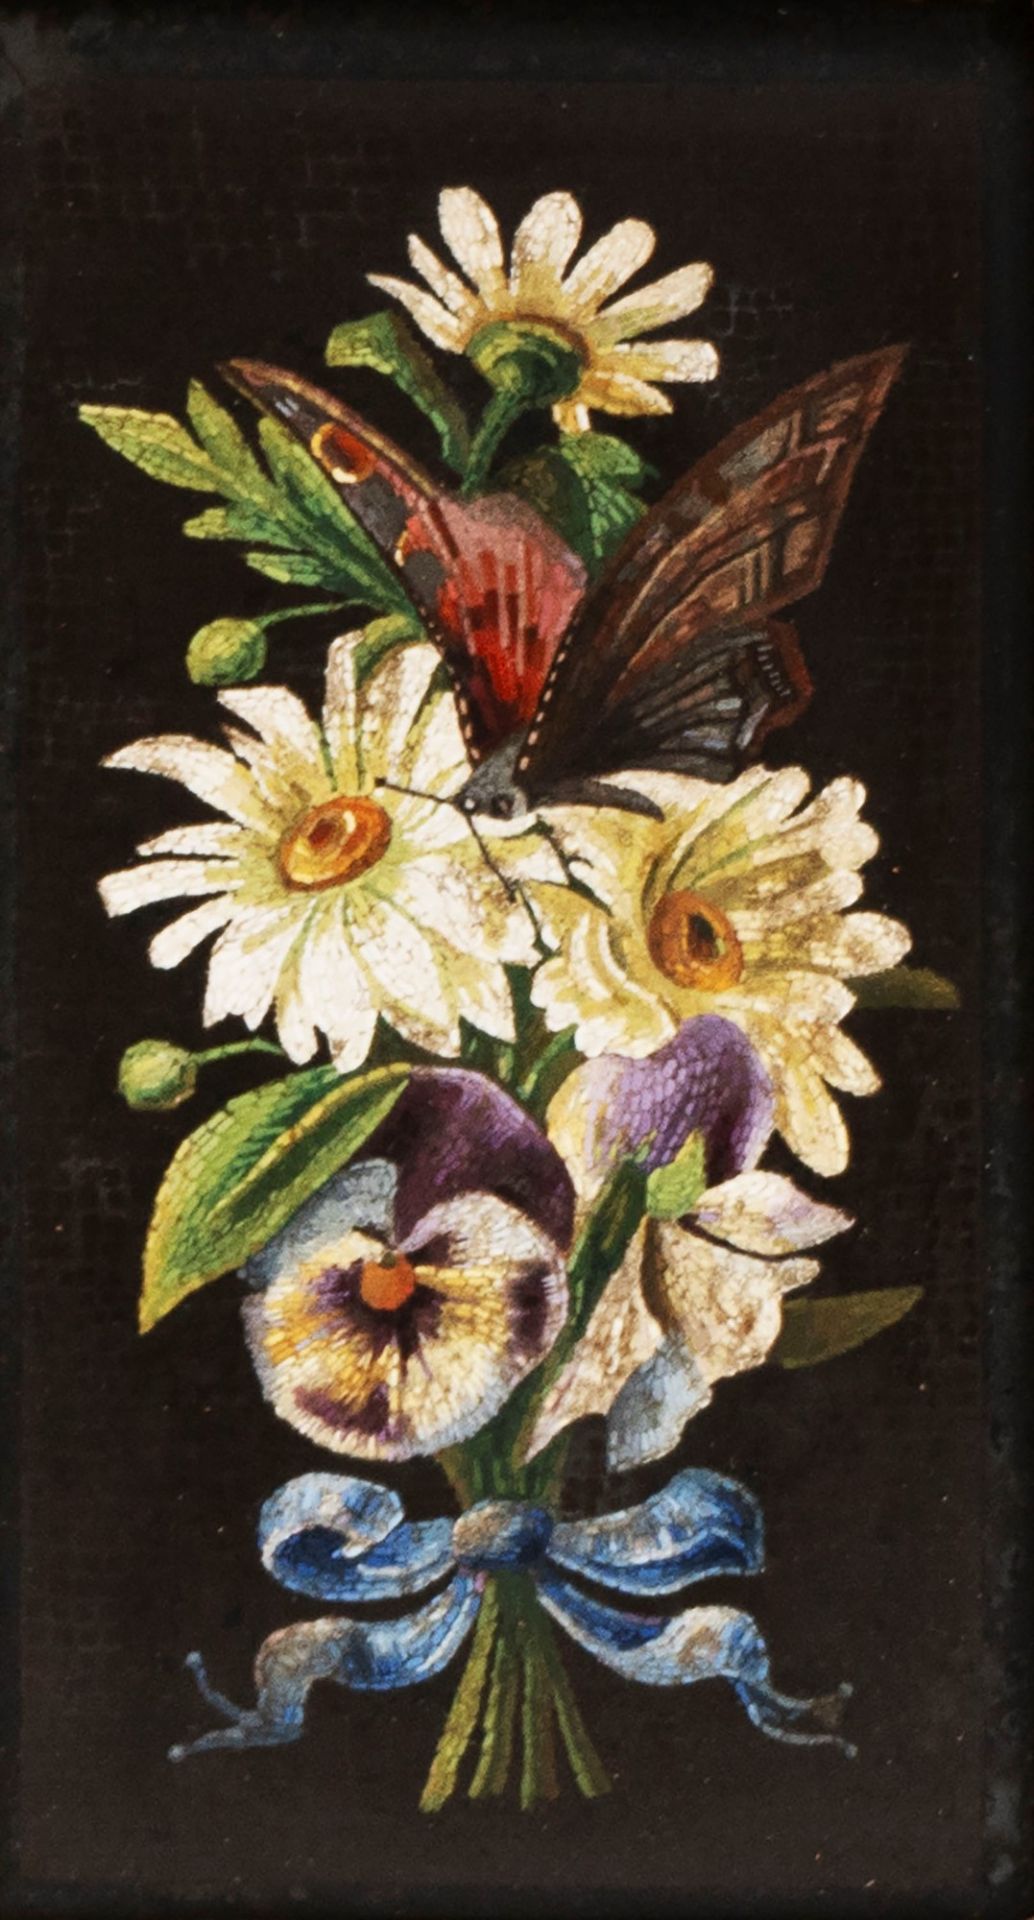 Micromosaic depicting flowers, 19th century - Image 2 of 3